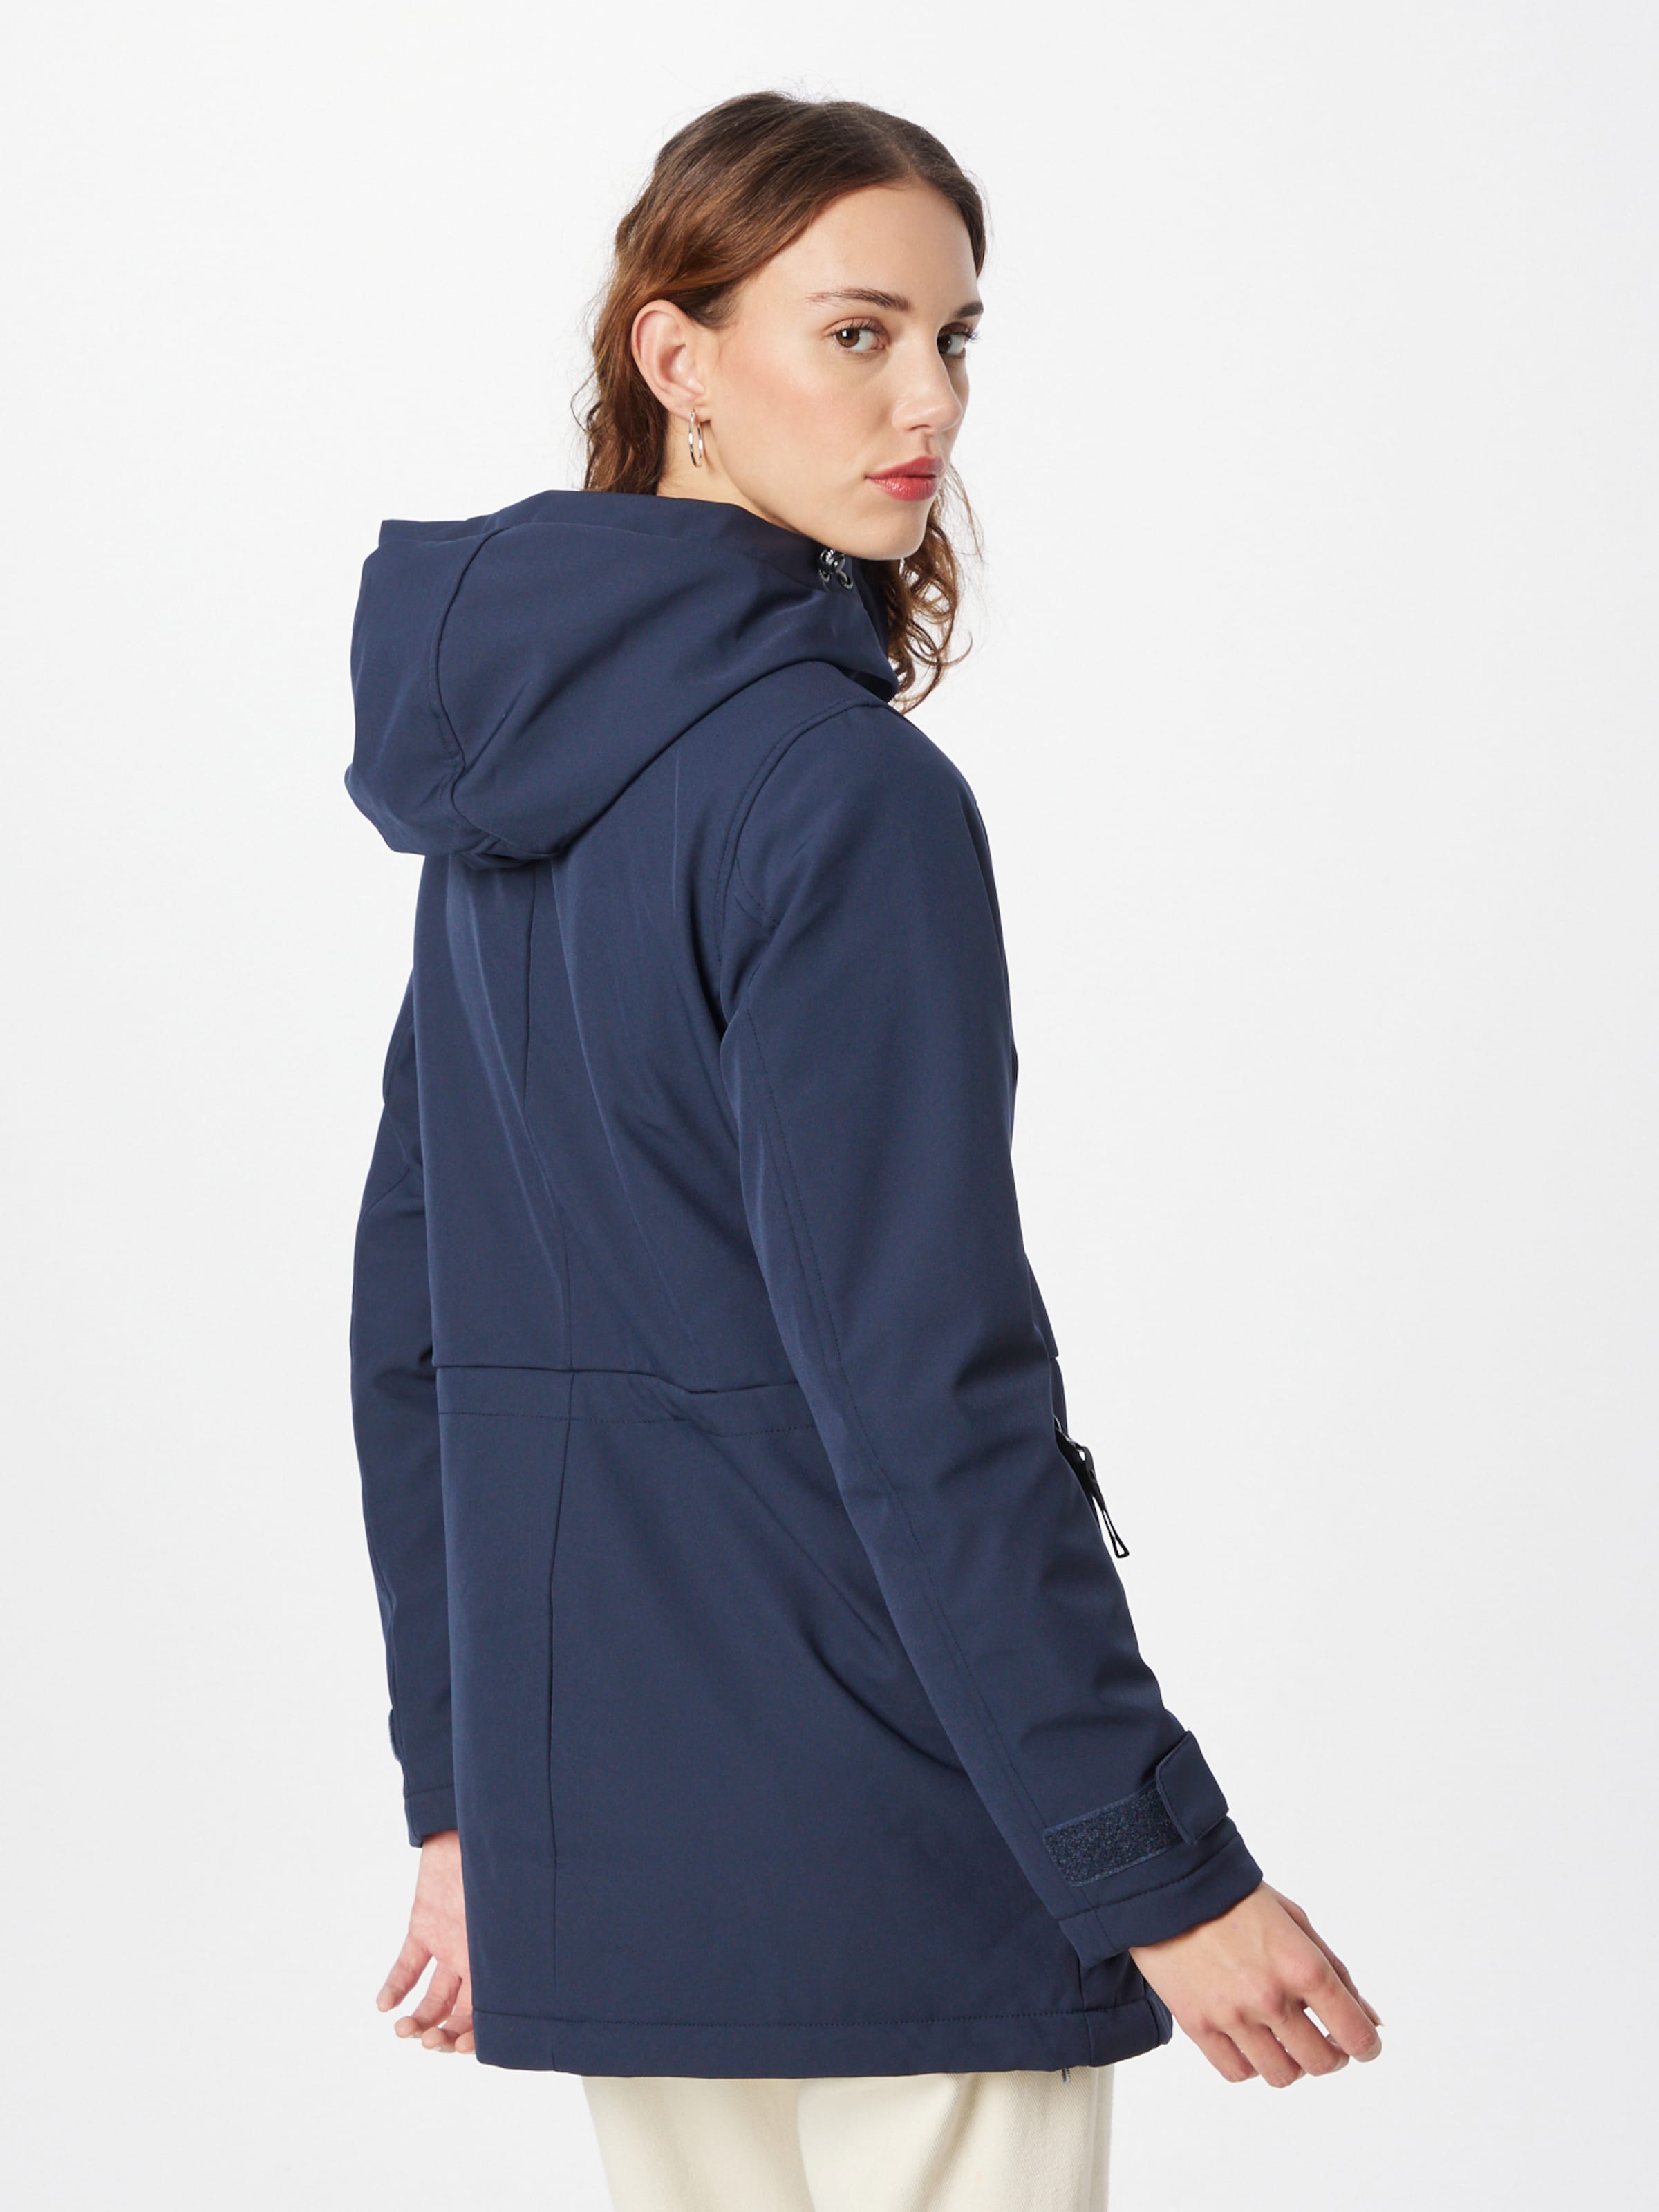 YOU Funktionsjacke ABOUT Navy | ICEPEAK in